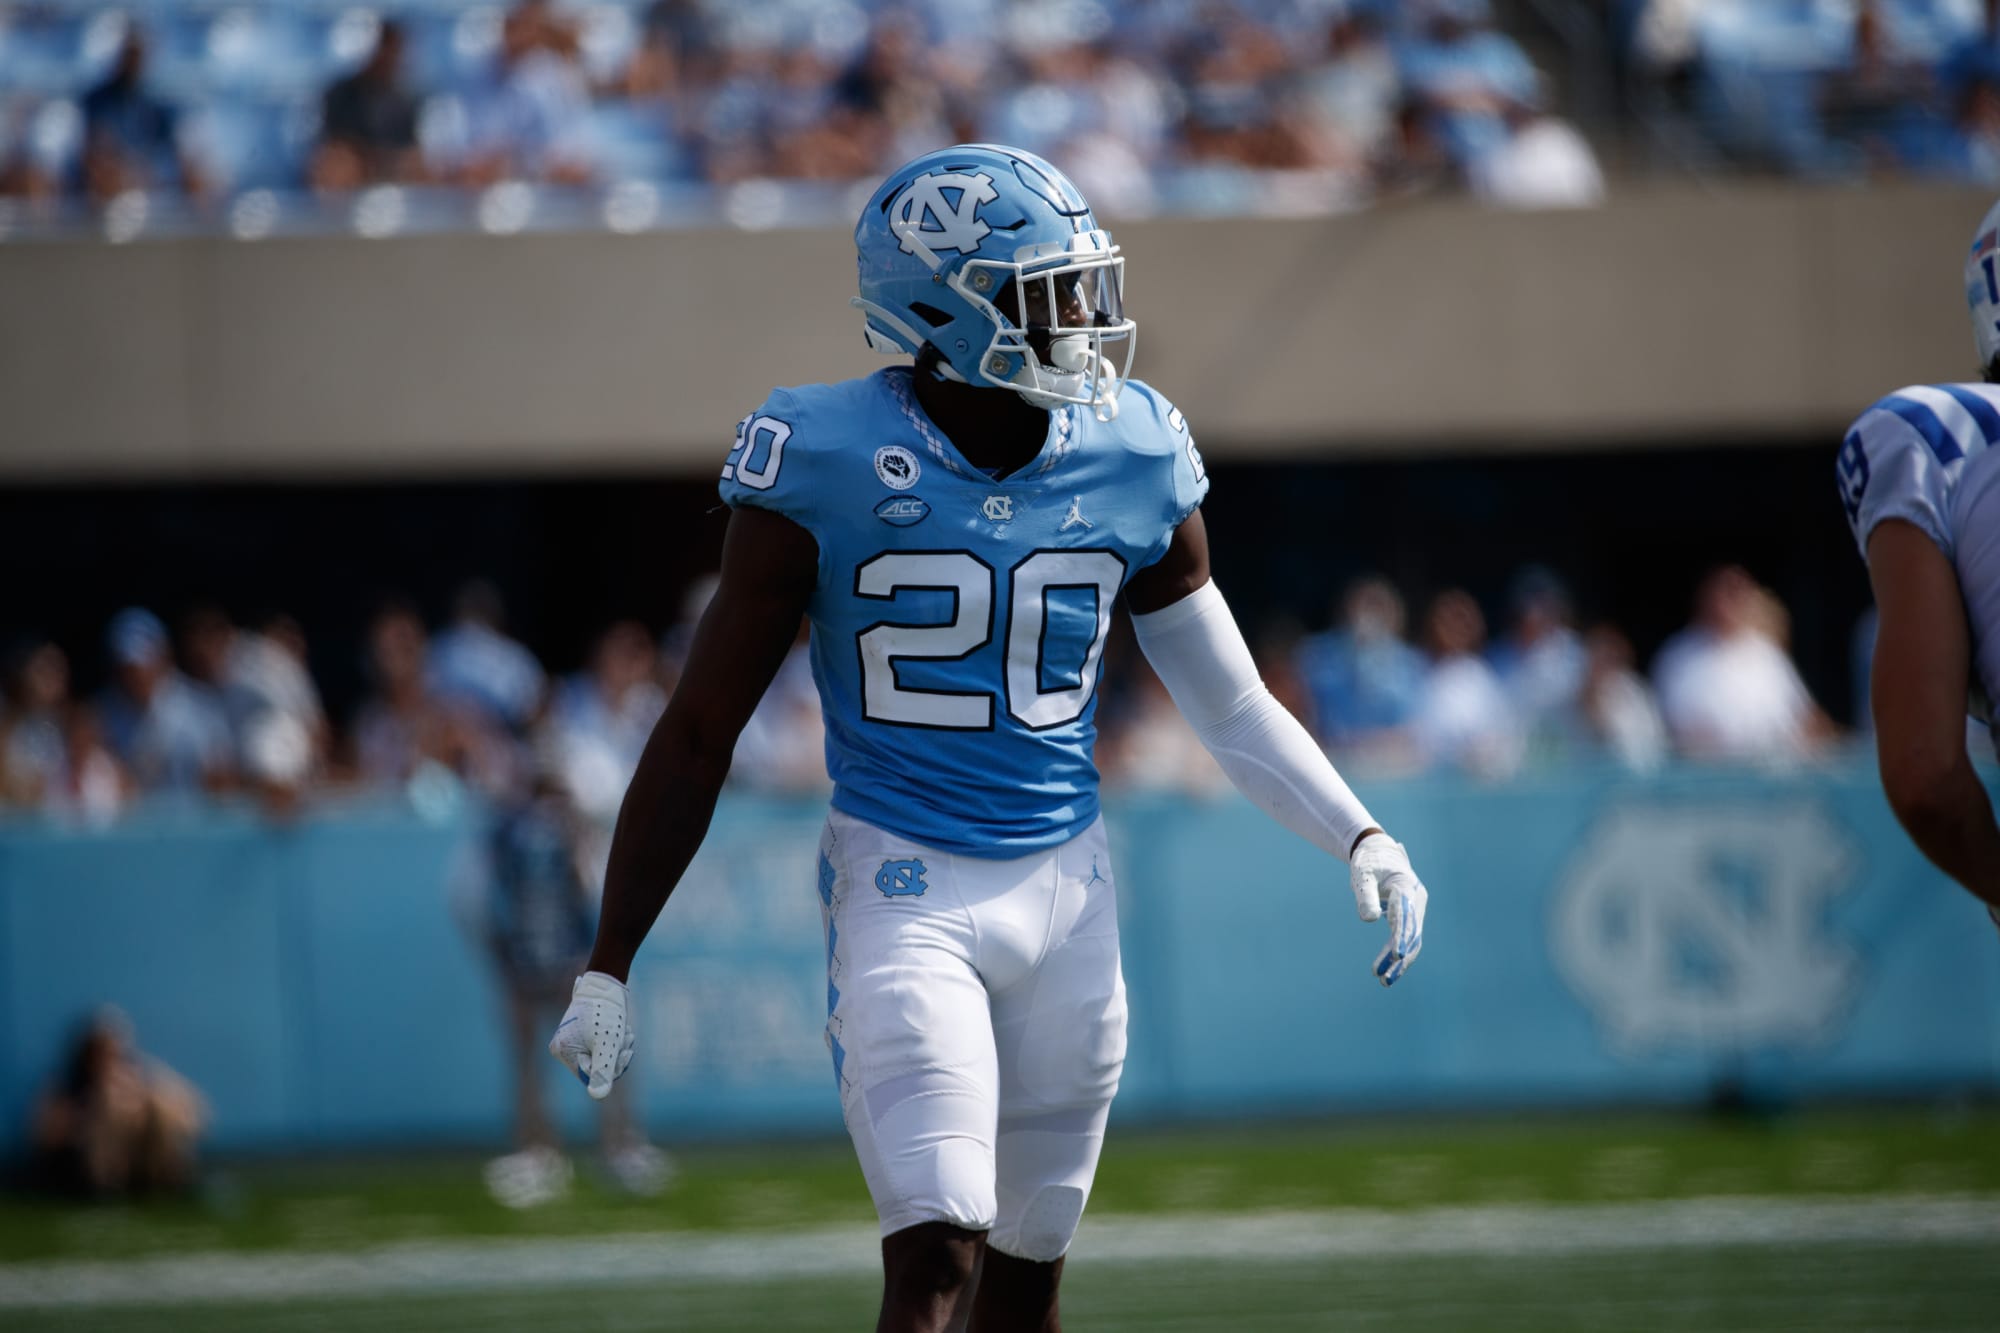 UNC Football: Tony Grimes Leaves Game With Injury